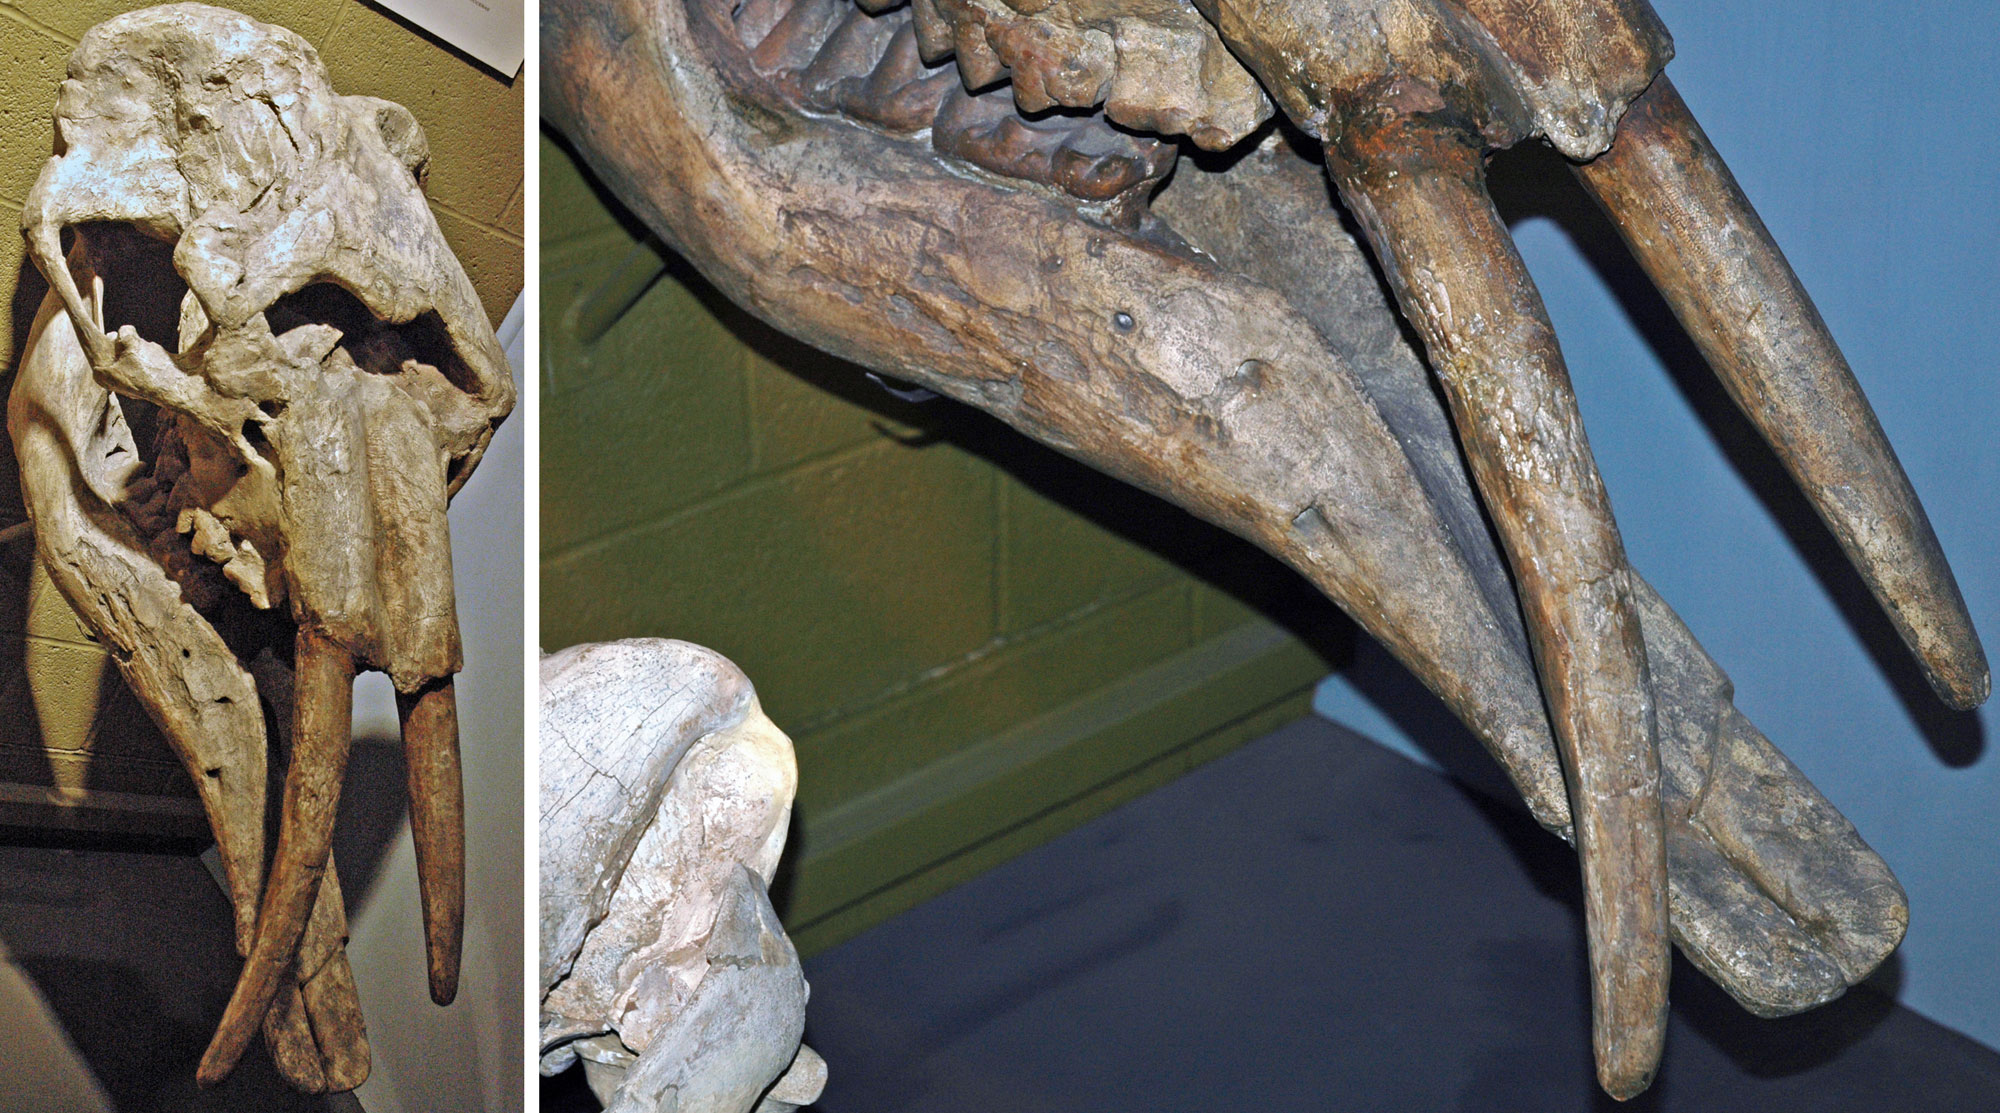 Photos showing two views of a gomphothere skull from the Miocene of Texas. Gomphotheres are related to elephants, but they have a projecting lower jaw. An overall view and a detail of the lower jaw and upper tusks are shown.